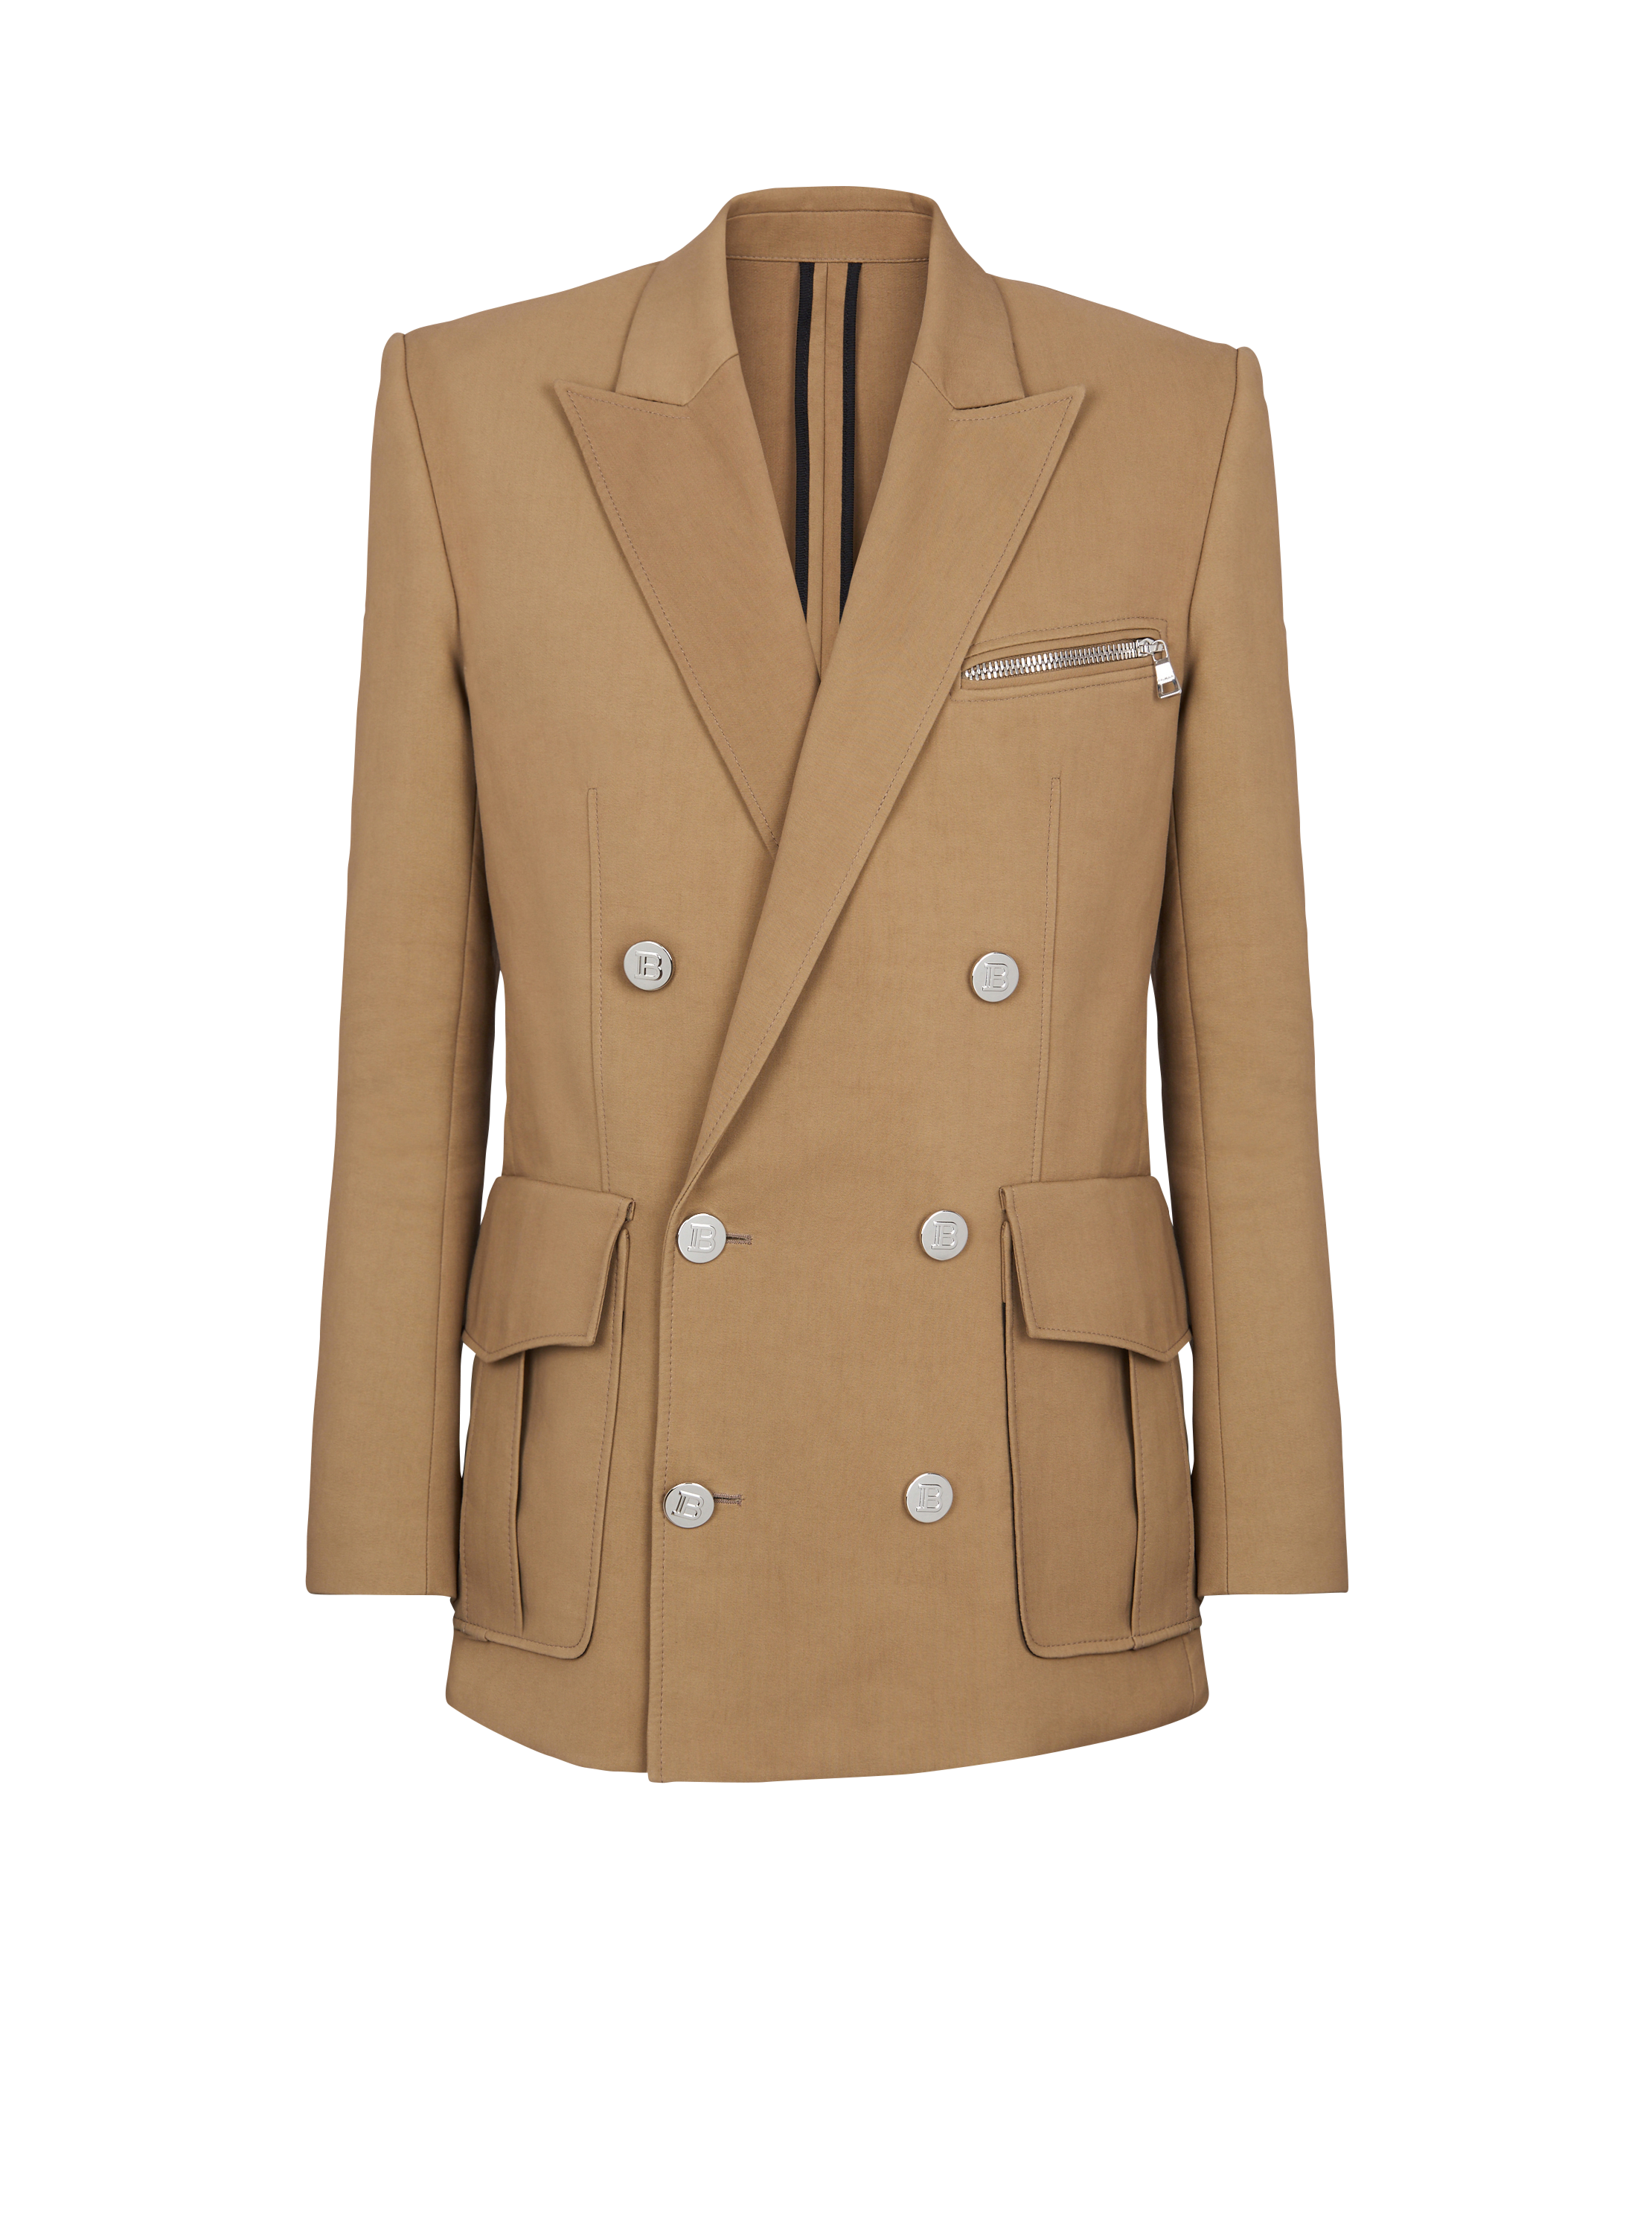 Double-breasted blazer, beige, hi-res